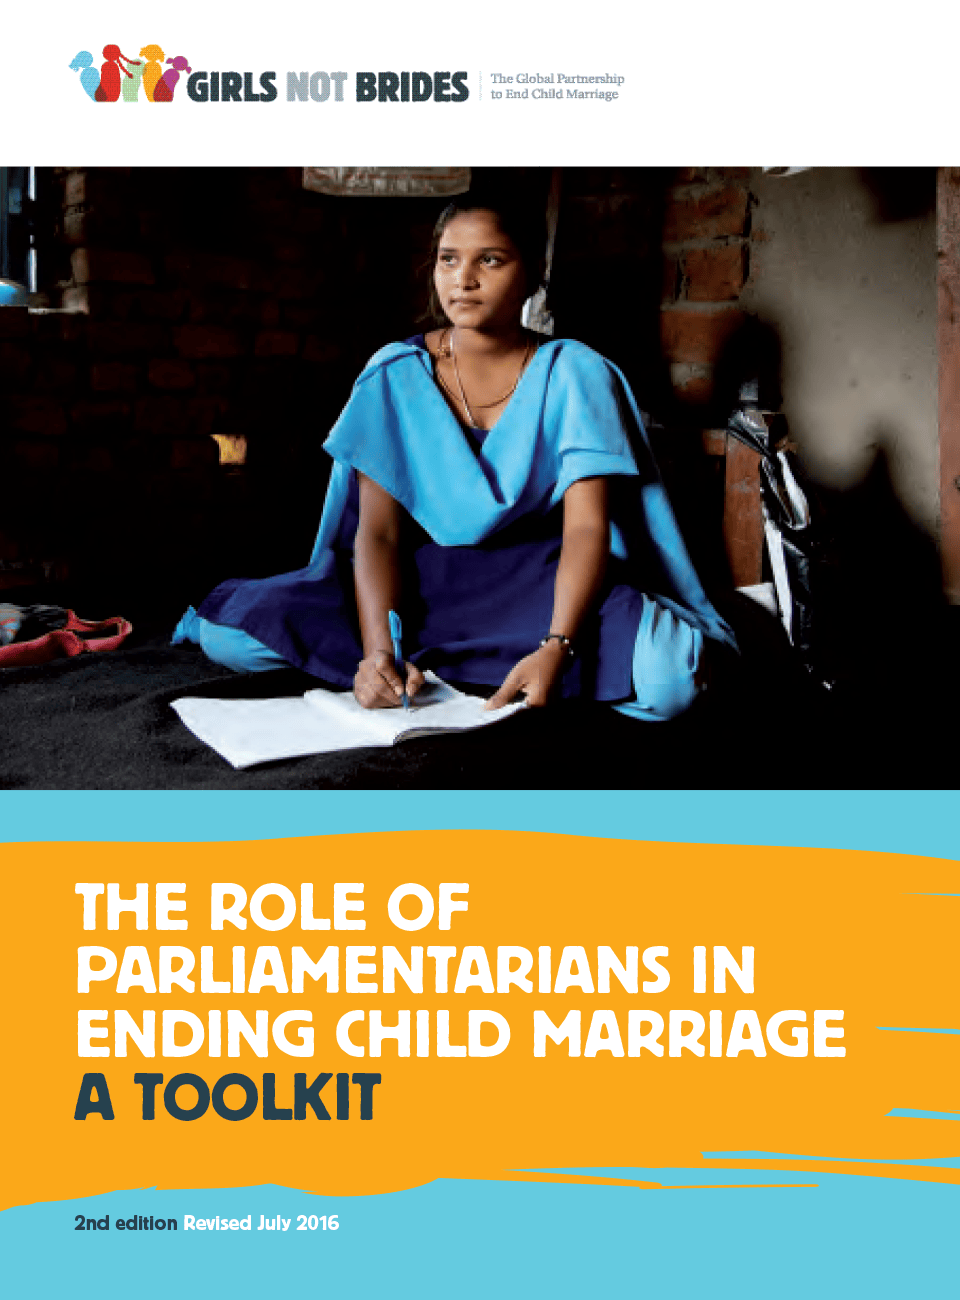 Toolkit on "The Role of Parliamentarians in Ending Child Marriage"